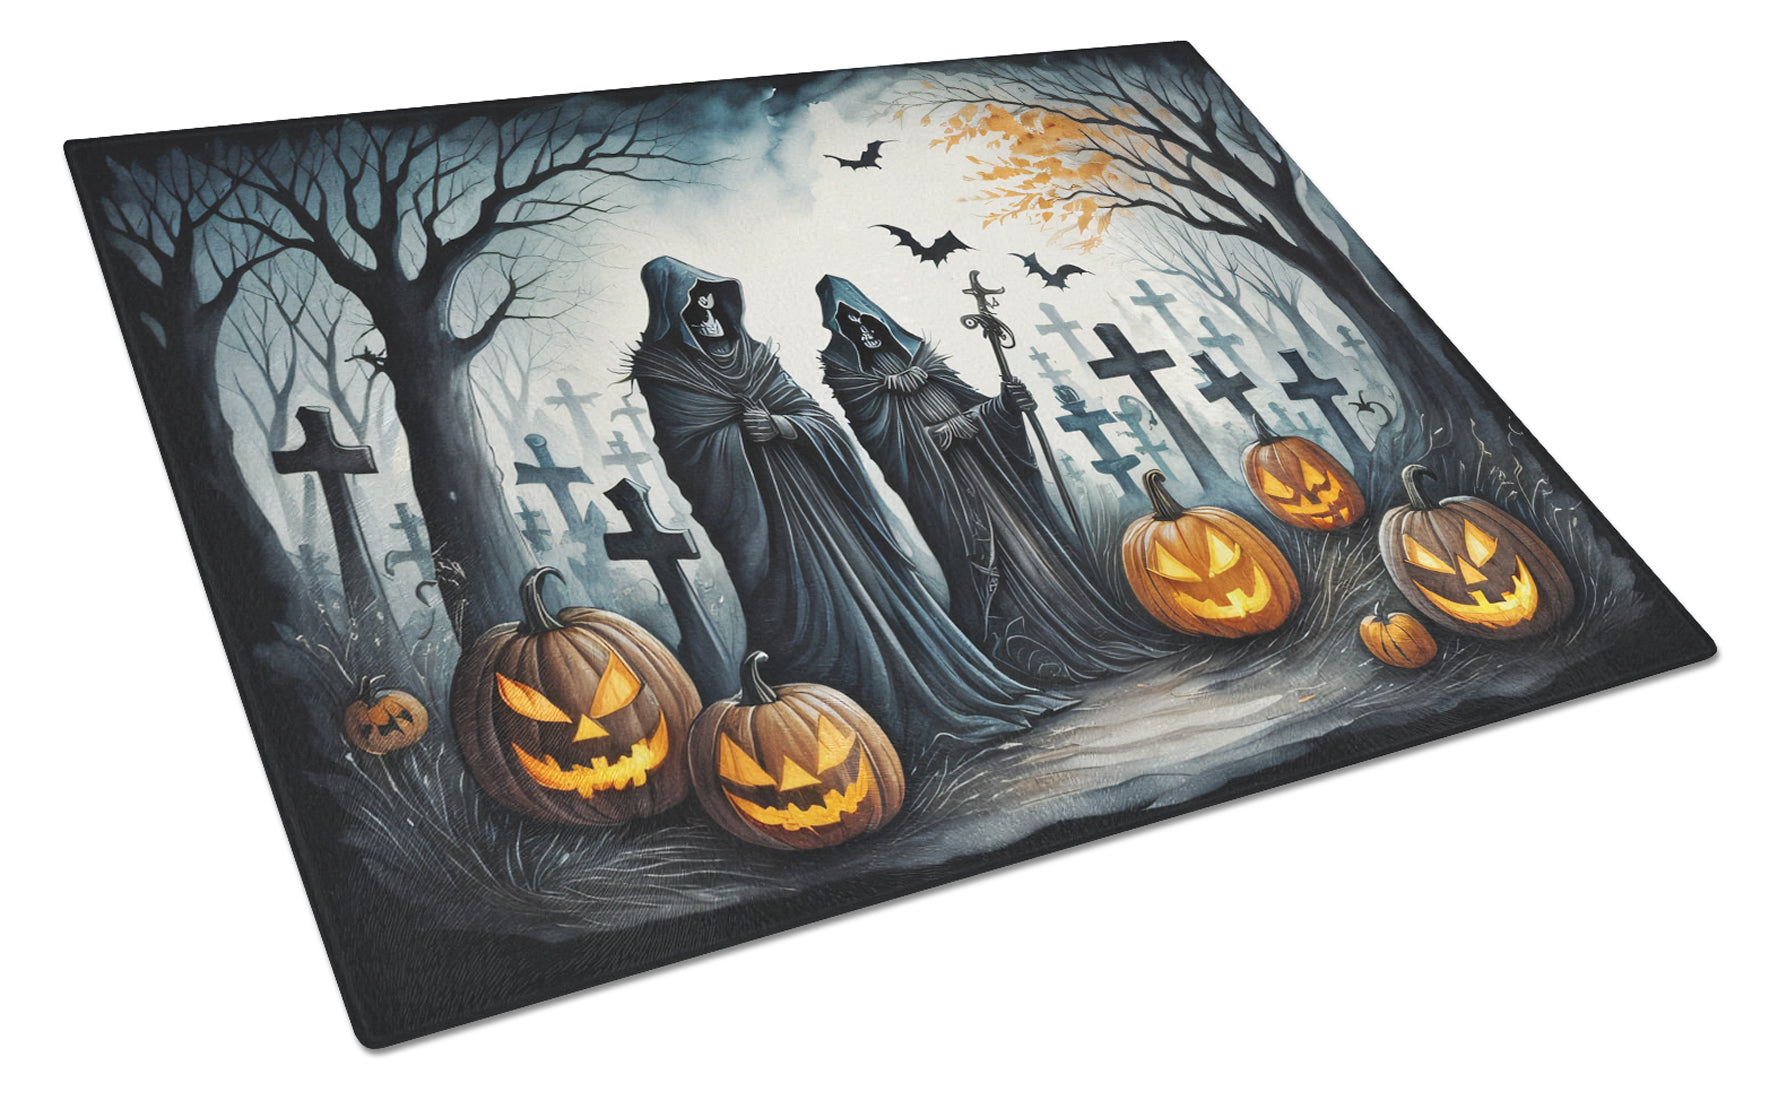 Buy this The Grim Reaper Spooky Halloween Glass Cutting Board Large